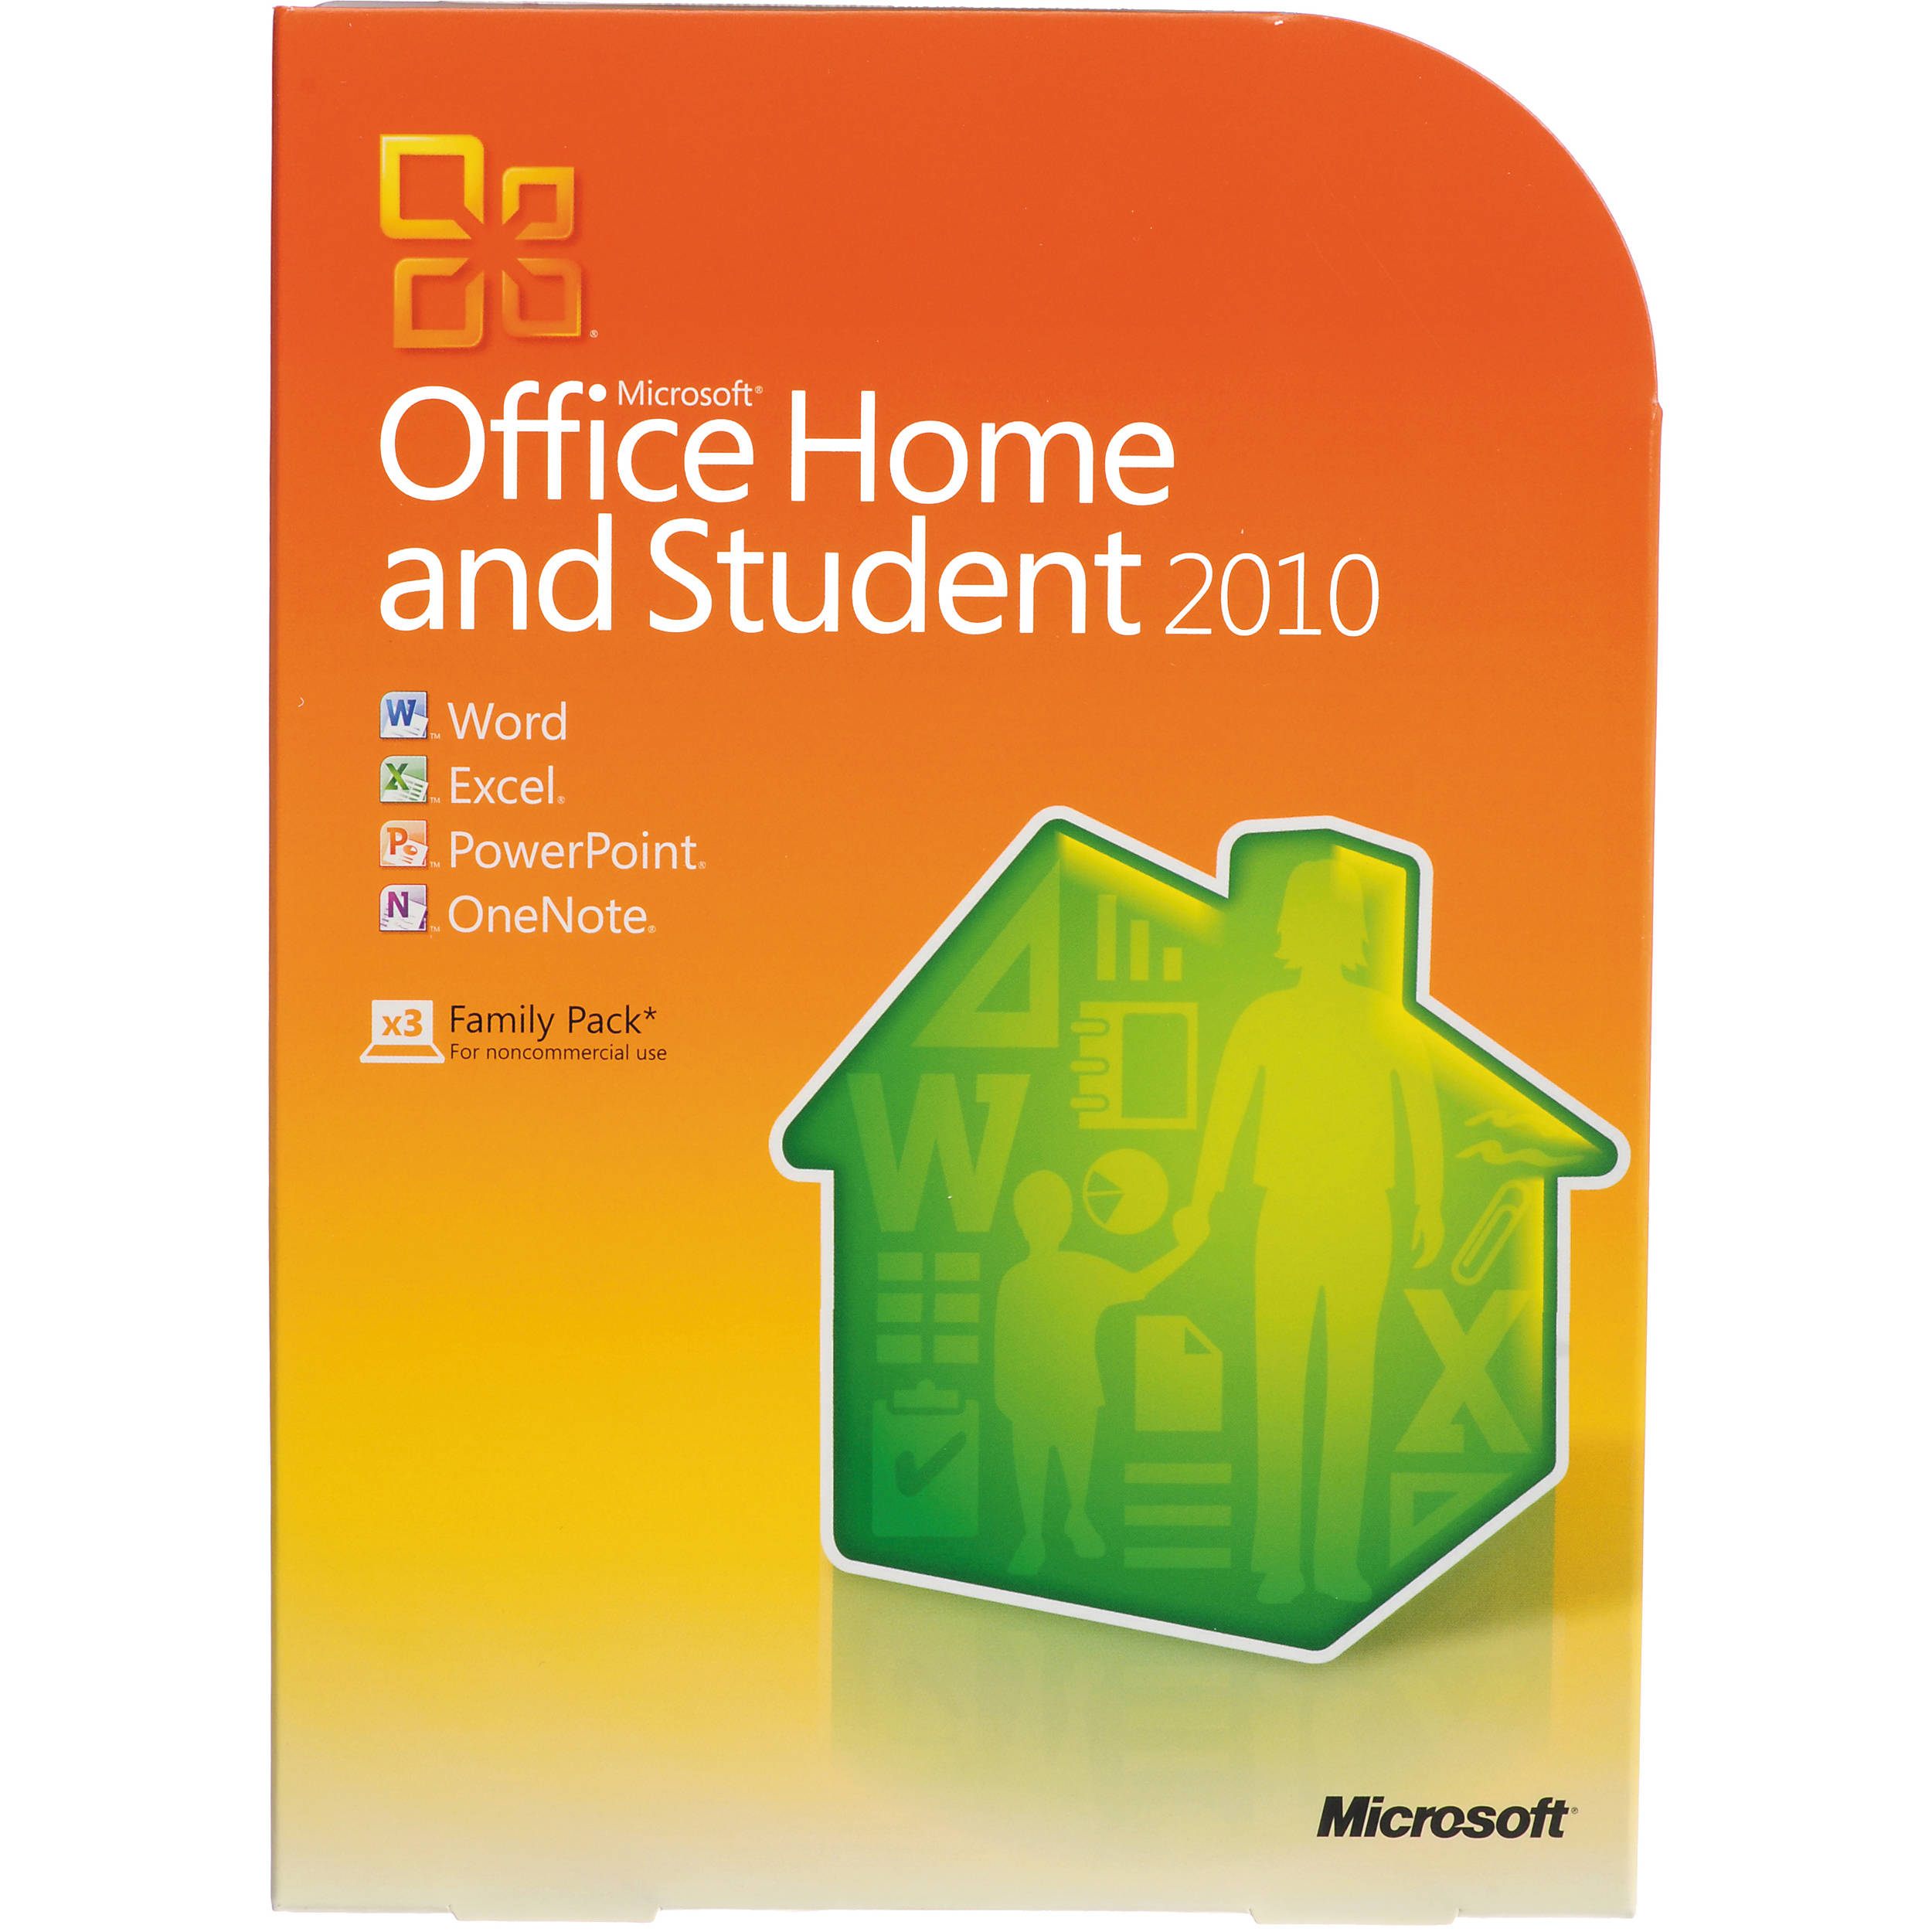 Download Office 2010 for Home and Student